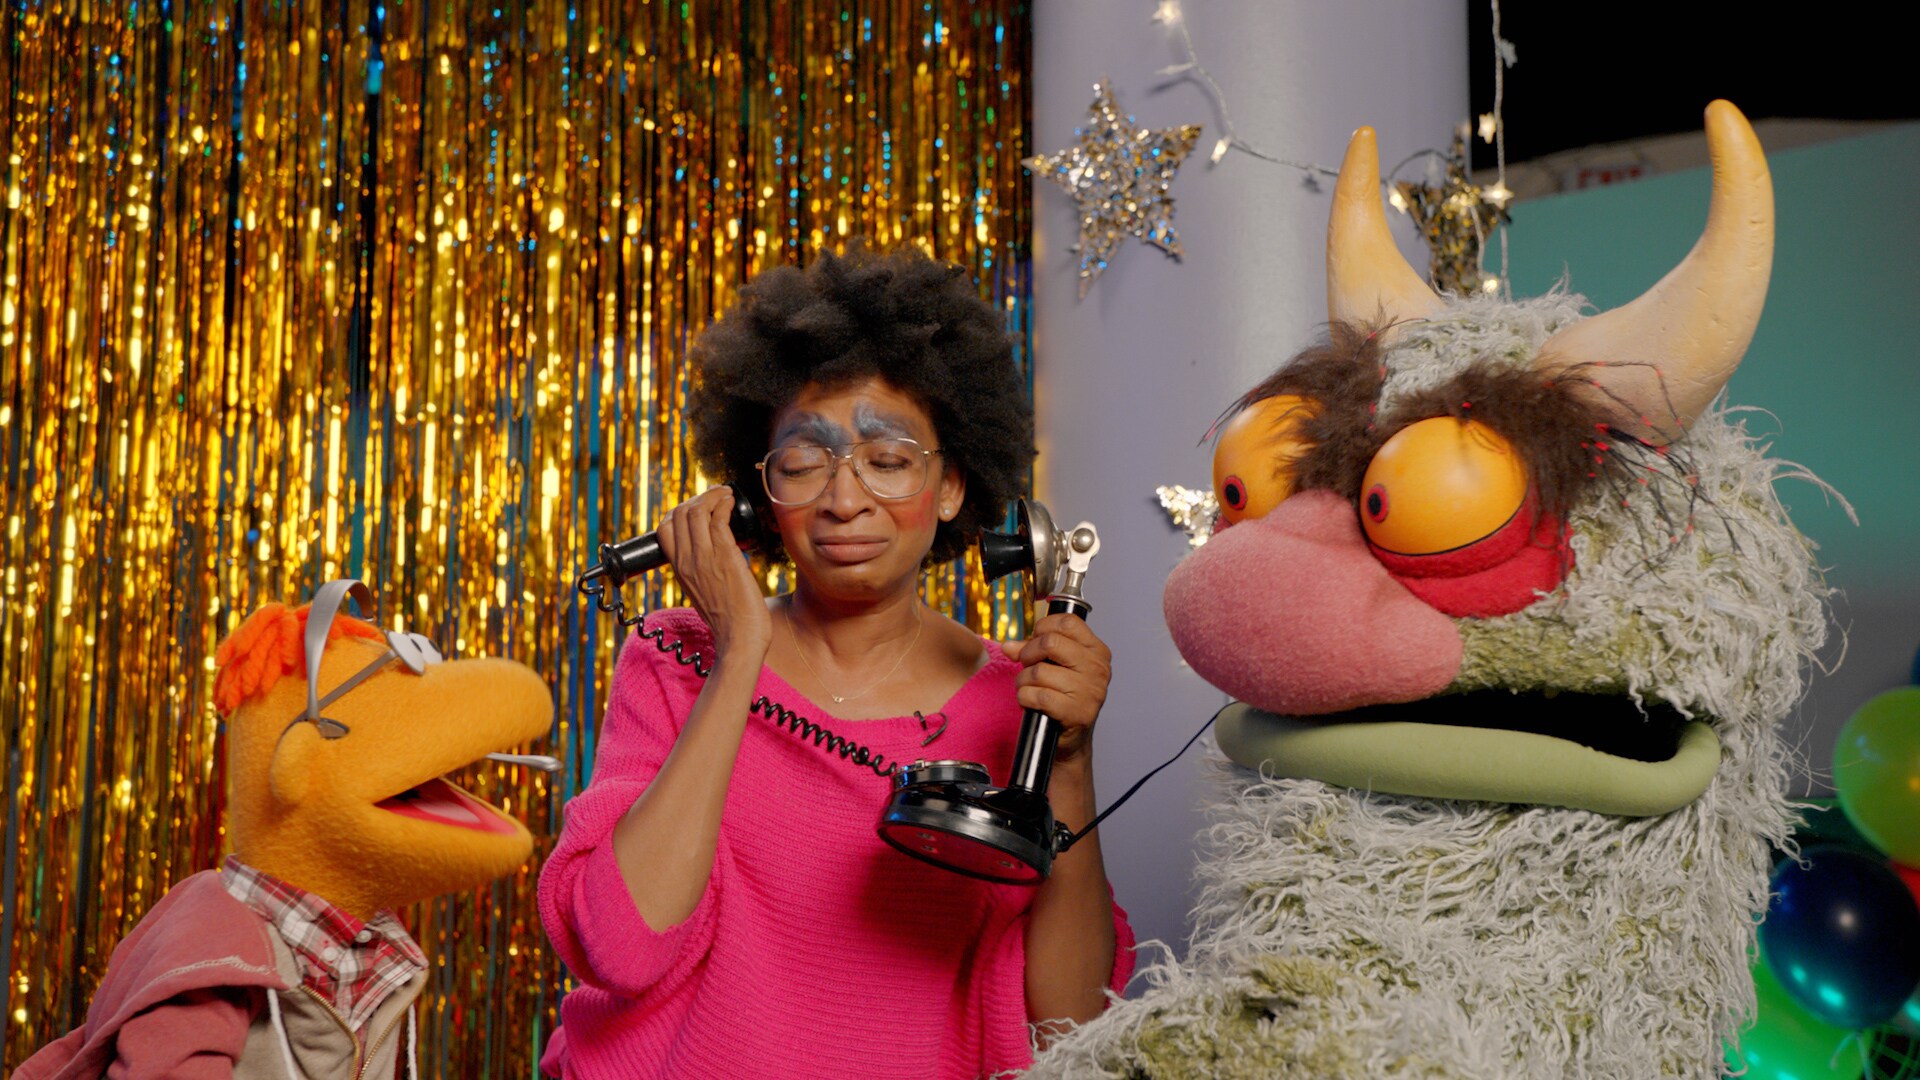 Scooter and contestants in “Muppets Now,” streaming only on Disney+